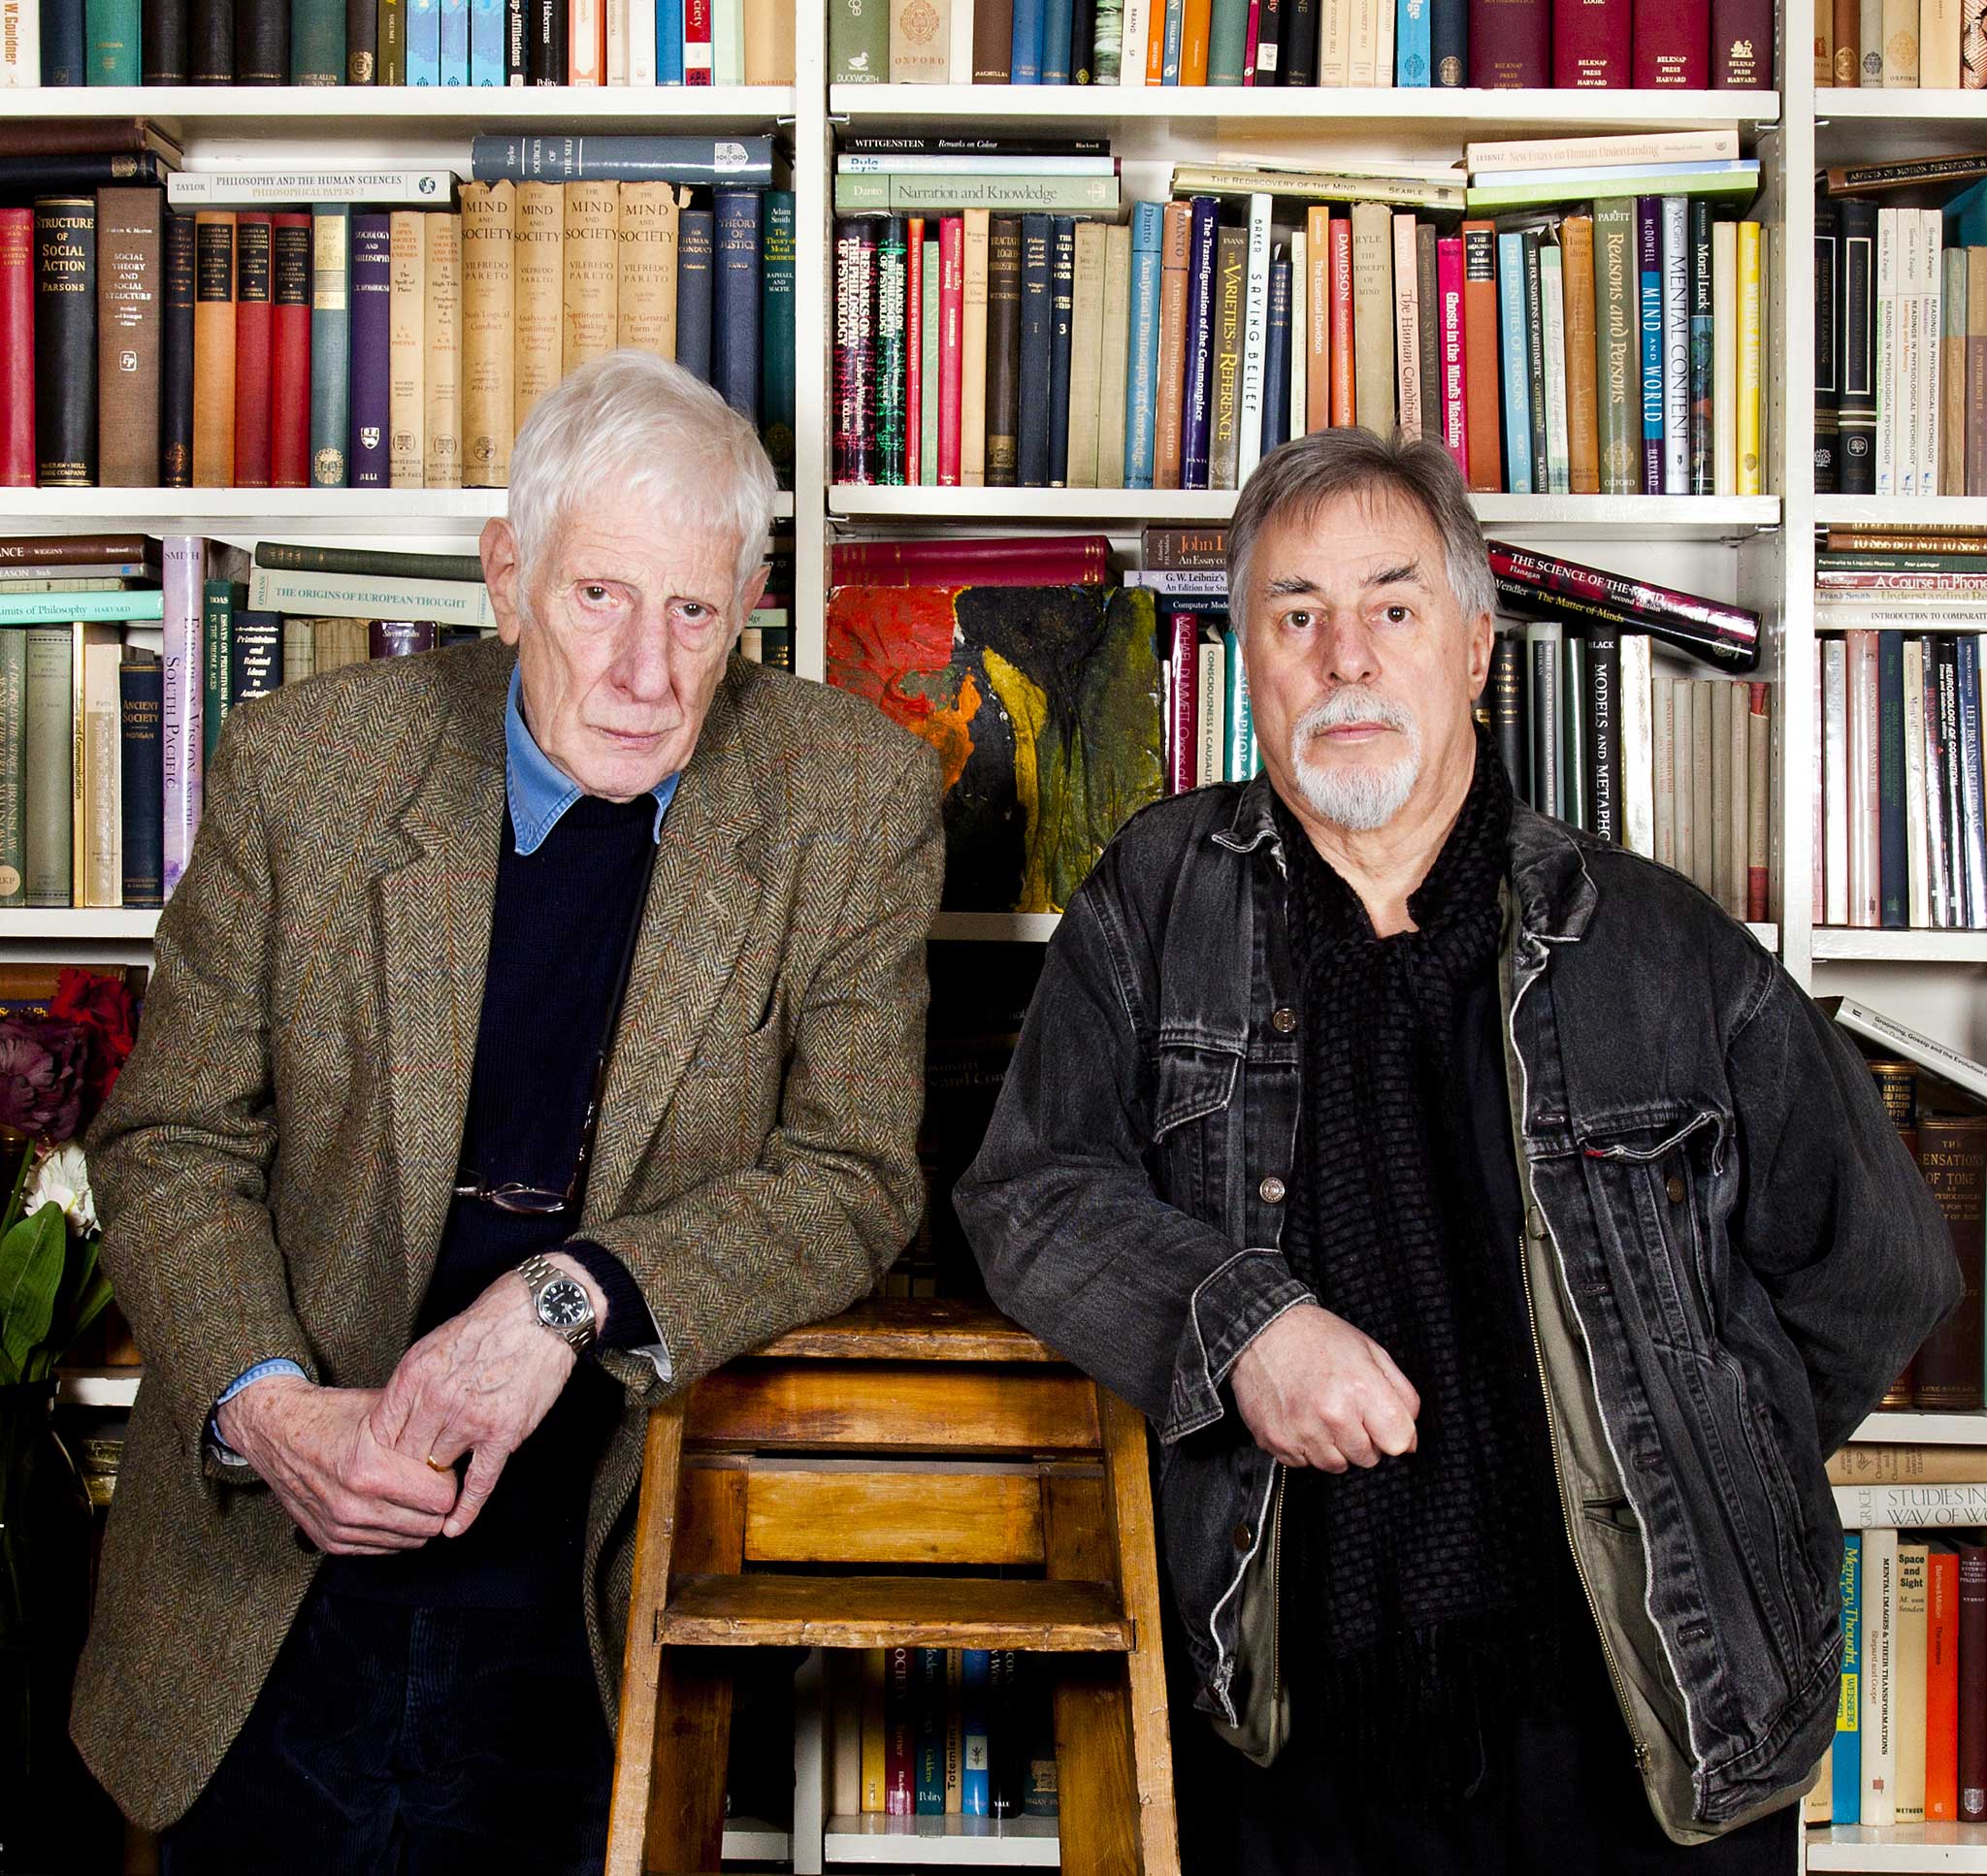 Miller (left) says of Rutter: 'He's straightforward with no silly arty-crafty pretensions.'